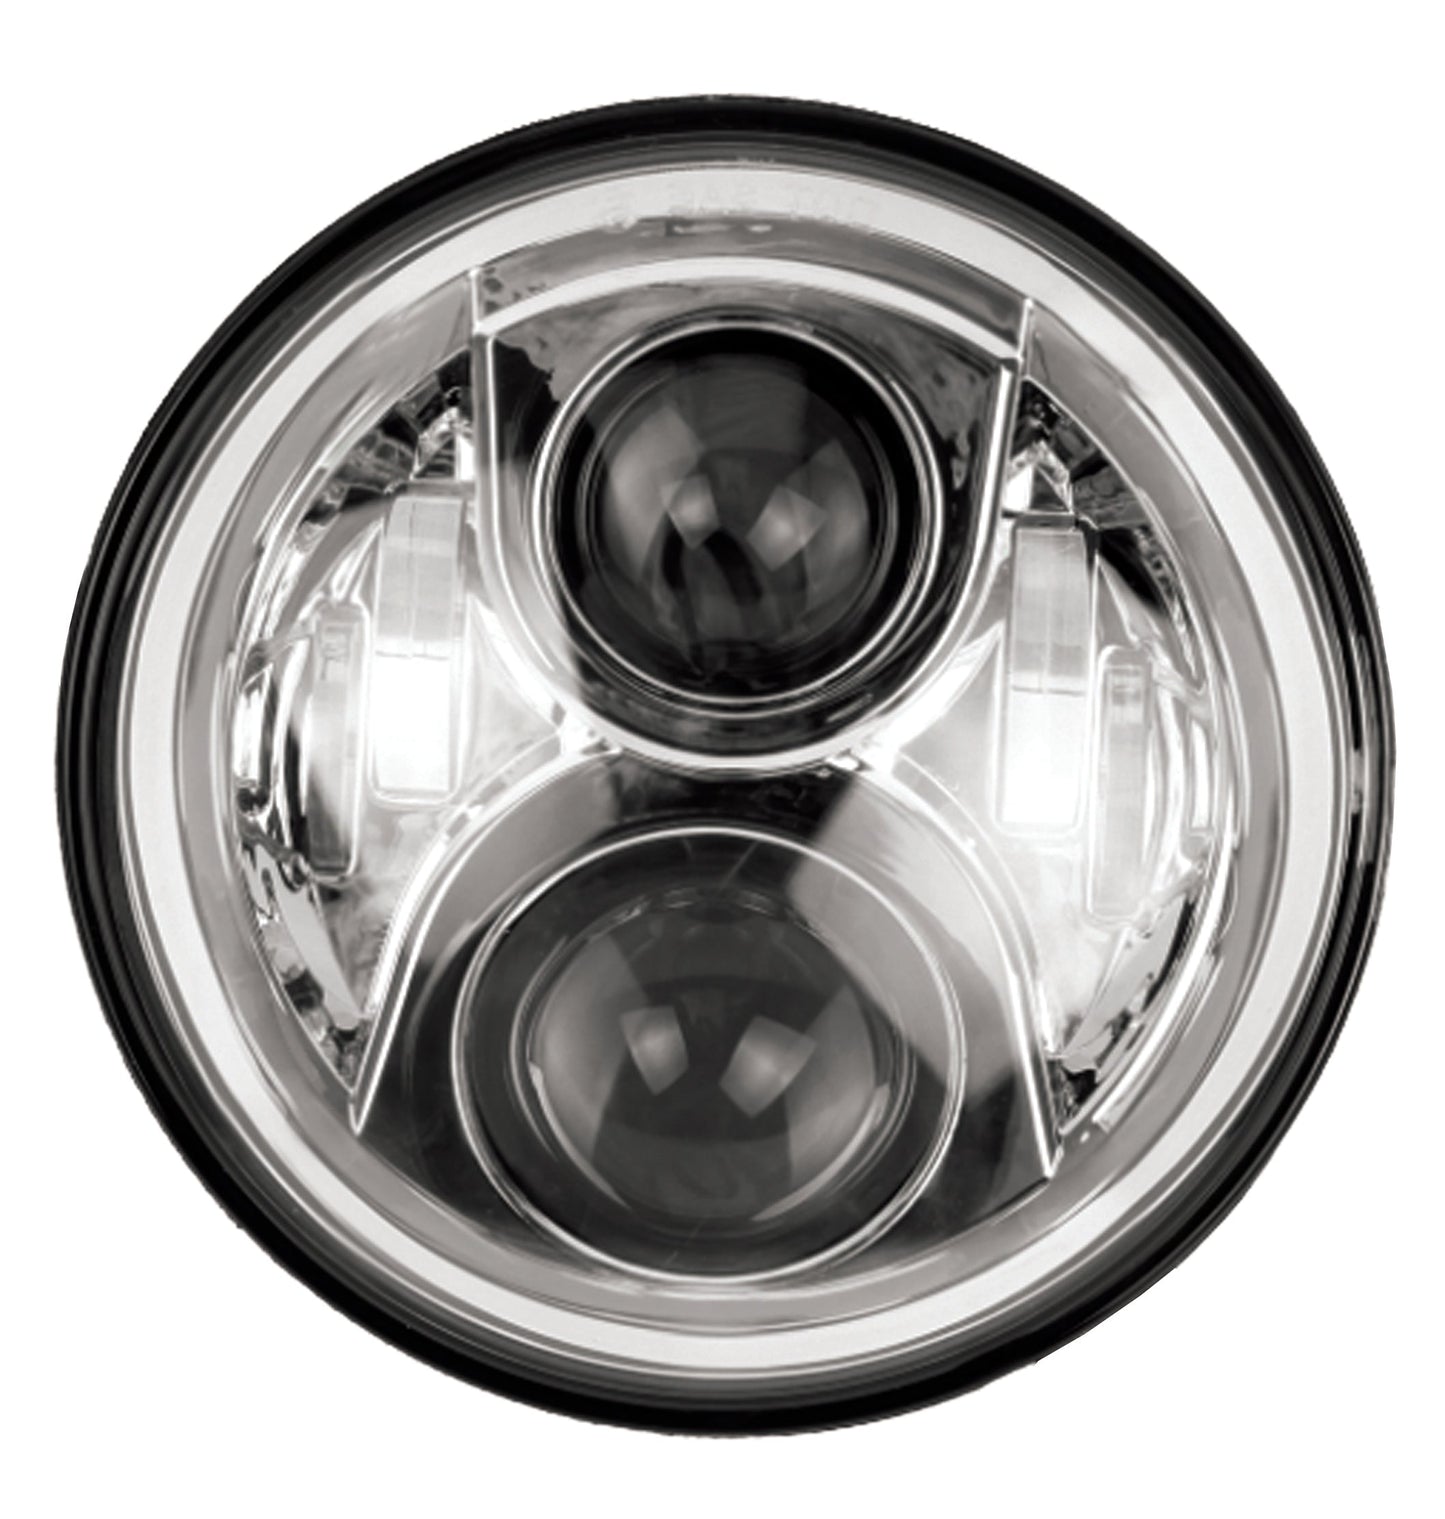 Offroad 7" LED Replacement Headlight for Motorcycle or Jeep